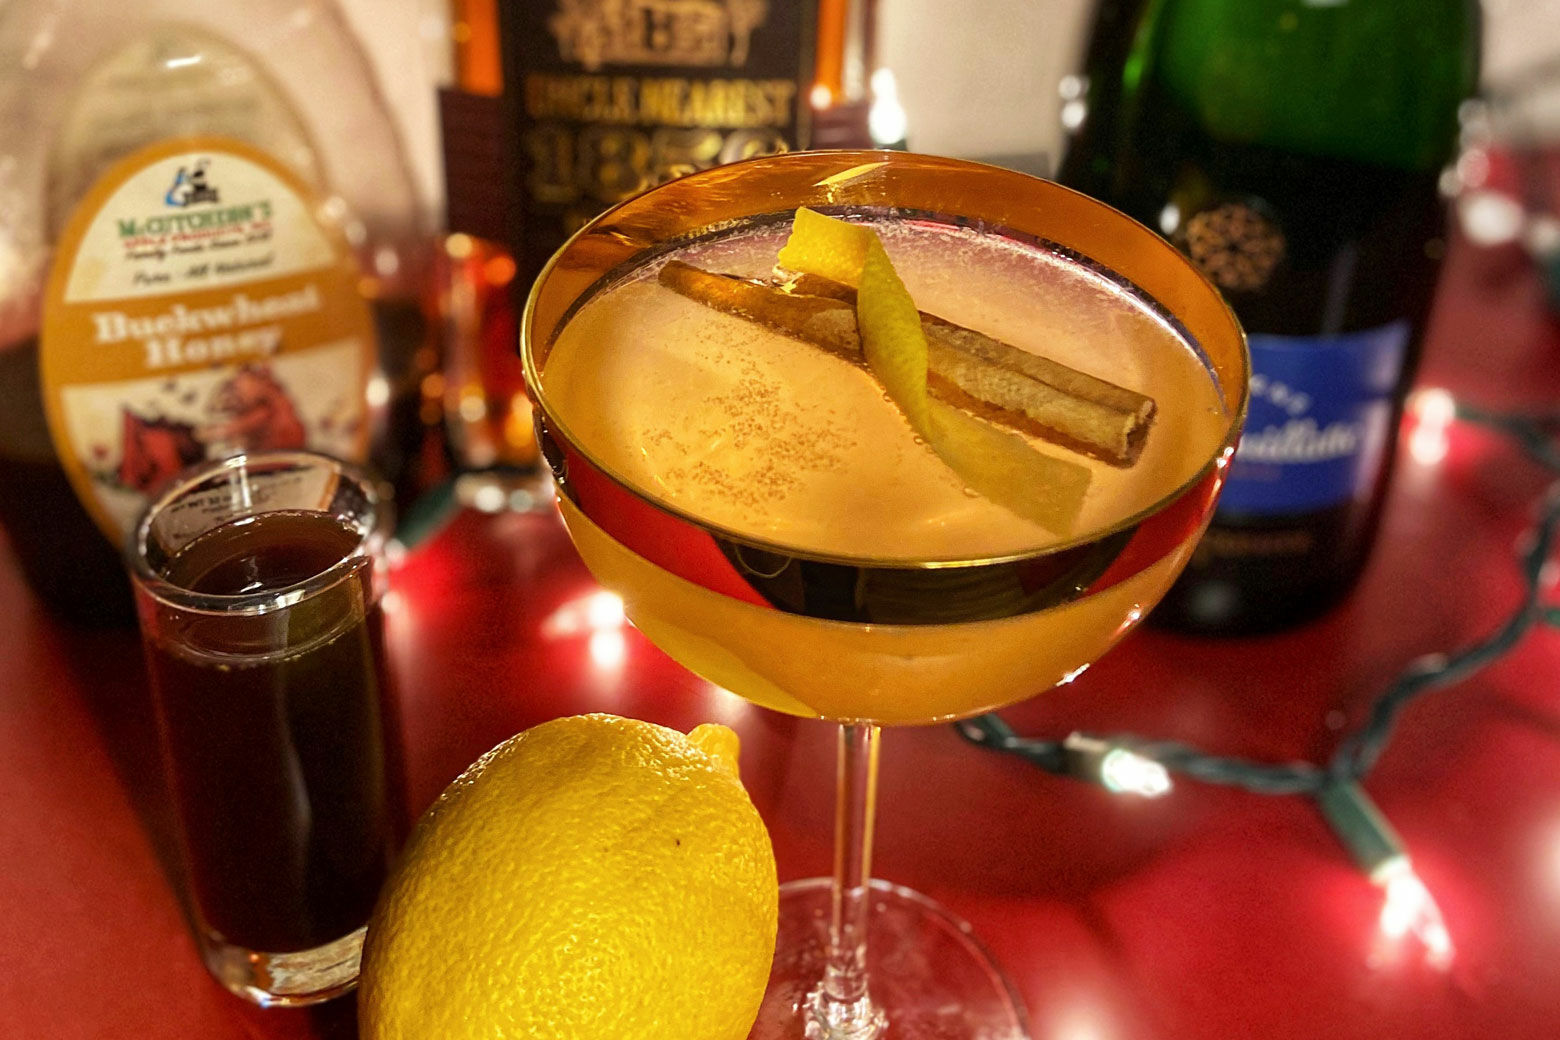 <p>Tracie Franklin, a former whiskey ambassador who is studying to be a master distiller, loves a whiskey sour because it&#8217;s so versatile, she said. It&#8217;s good for New Year&#8217;s Eve because a home bartender can handle the basic preparation, but it can be made festive with an infused syrup.</p>
<p><span style="font-weight: 400;">&#8220;When you&#8217;re making a whiskey sour, do you want to have a bourbon or a rye?,&#8221; she asked. &#8220;Do you want it to be an overproof? Then you get to choose which citrus. I went with lemon. We come to our sweetener. That&#8217;s where we can really get creative because making a simple syrup and infusing those is so easy.&#8221;</span></p>
<p>If you&#8217;re making a goldrush, bump up the volume of your ingredients. If you&#8217;re going to top it with sparkling wine, decrease the goldrush components and top with wine before serving. <em>See the variations in the slide below</em>.</p>
<p>&nbsp;</p>
